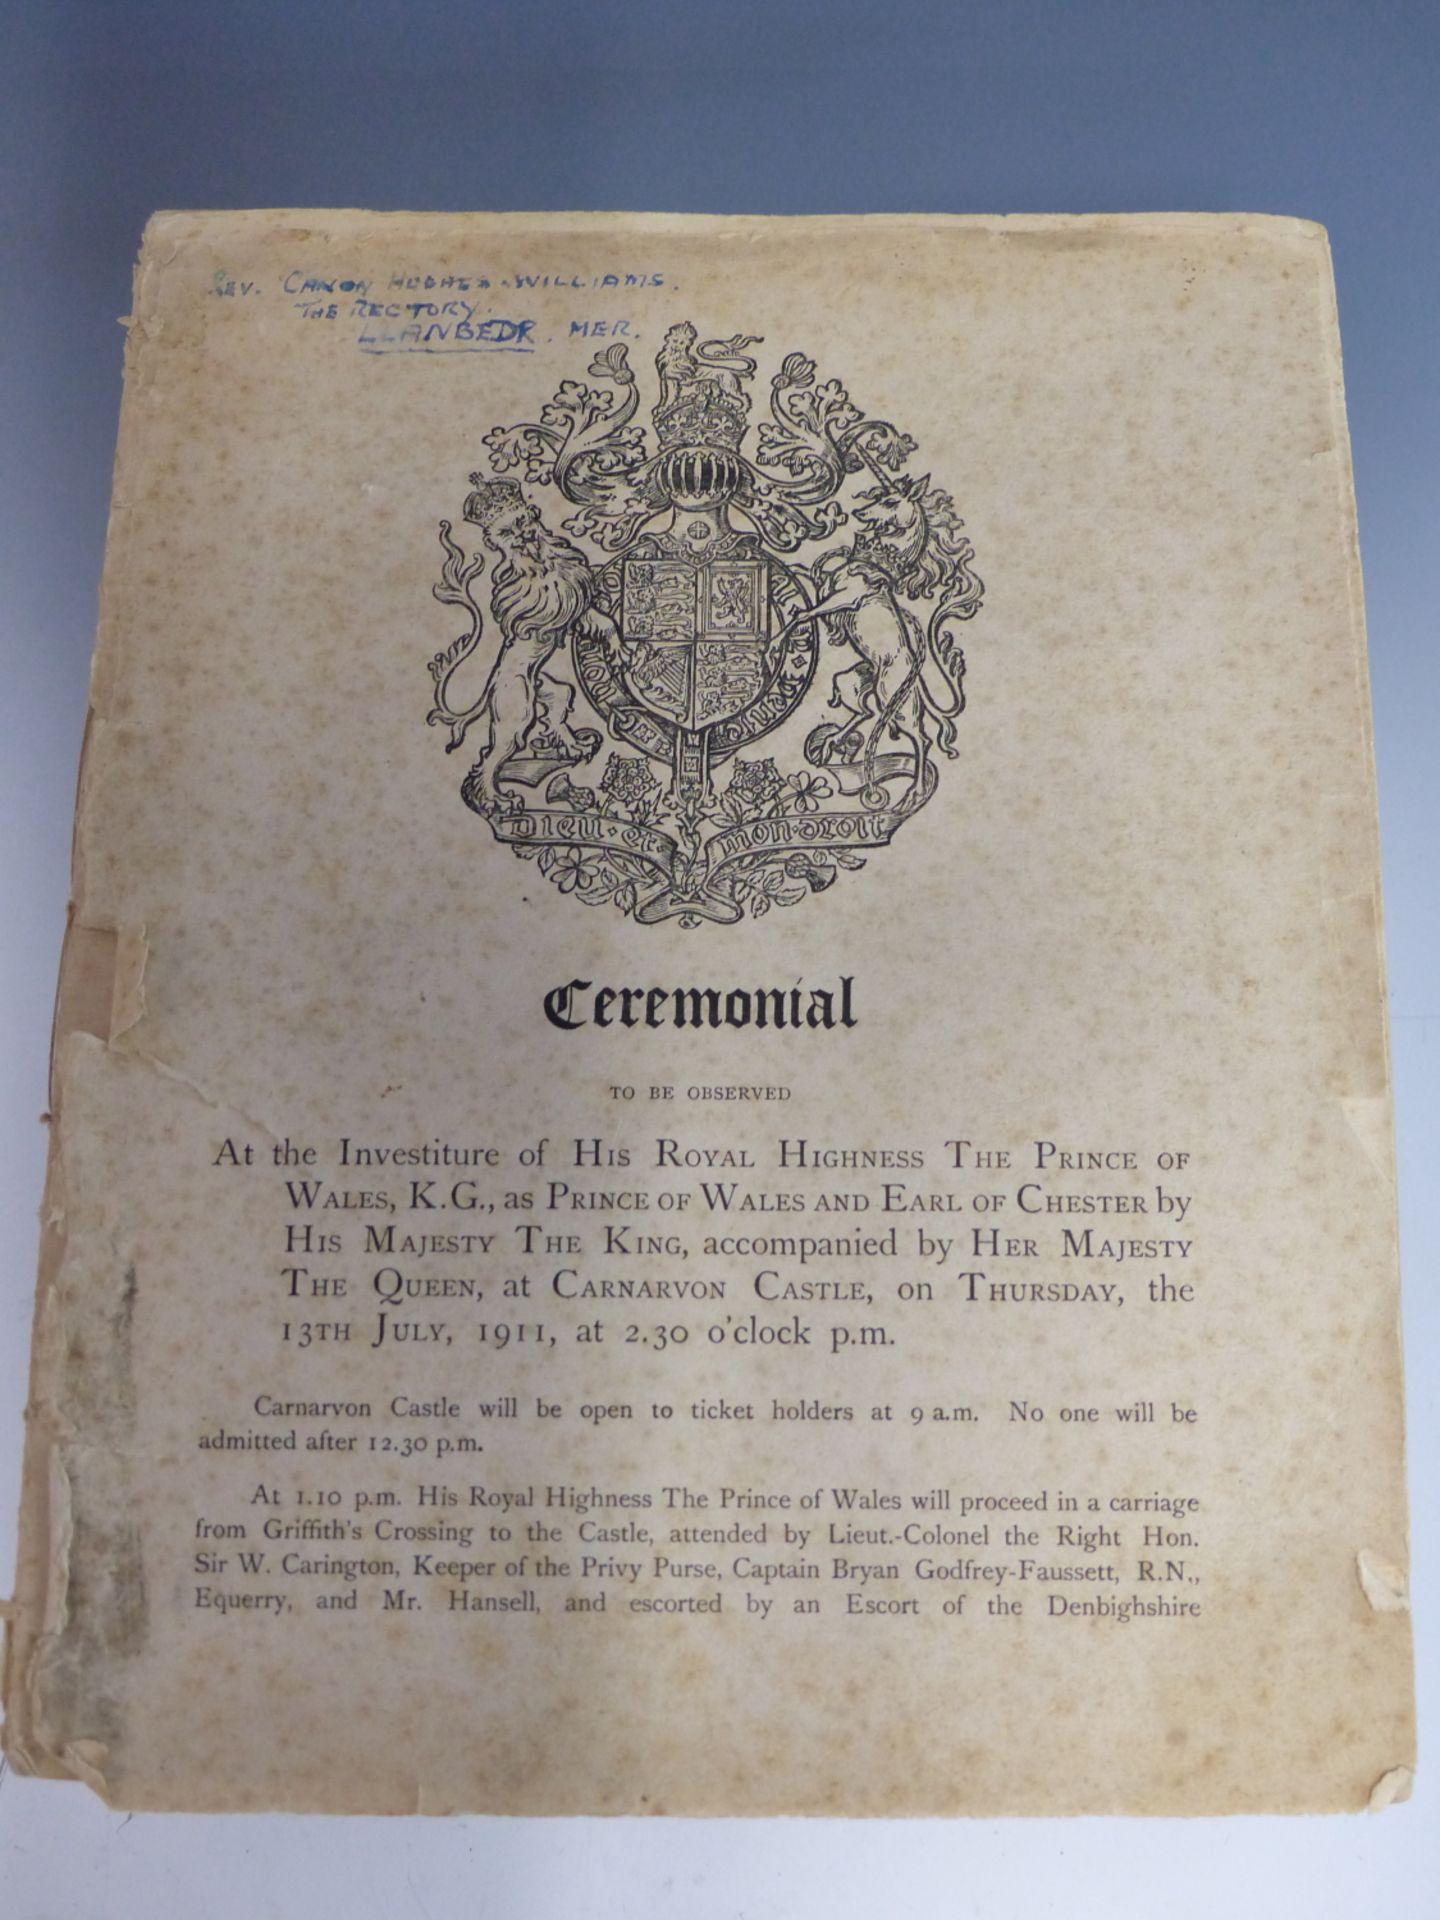 A RARE 1911 ORDER OF CEREMONY AT THE INVESTITURE OF HIS ROYAL HIGHNESS THE PRINCE OF WALES (